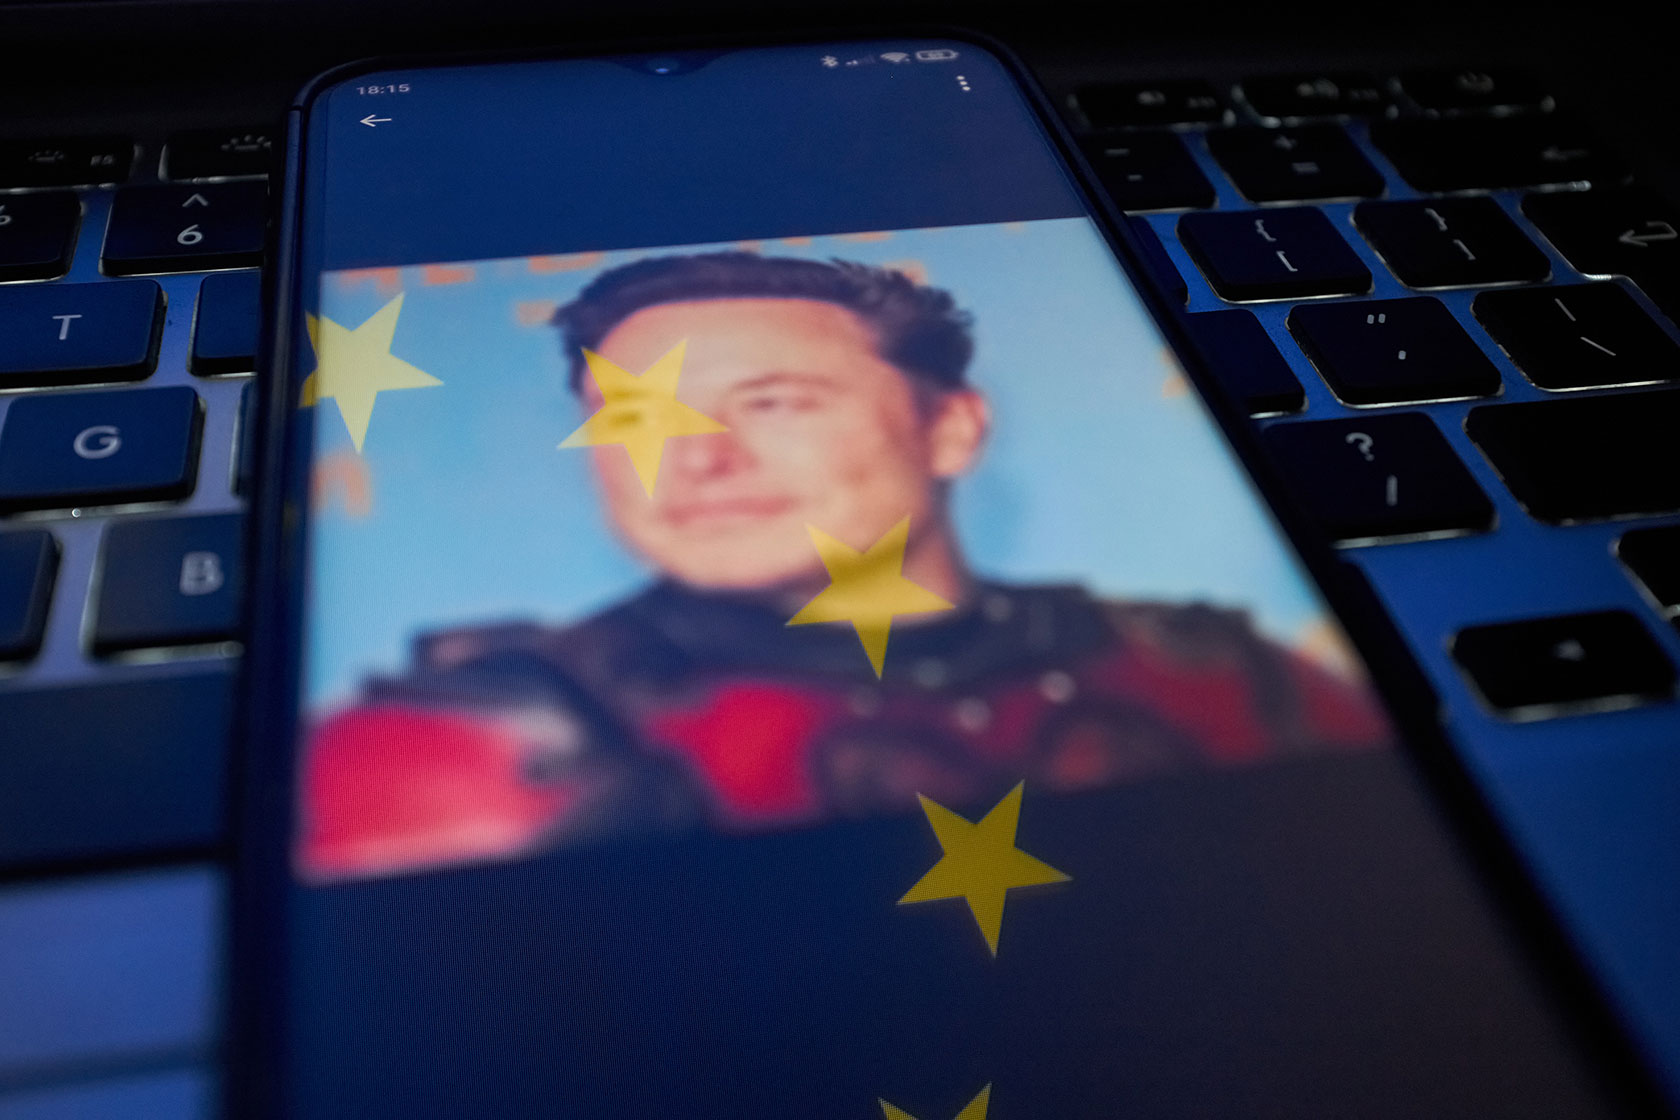 Photo illustration shows Elon Musk's face with the EU flag overlaid, on a smart phone sitting on a keyboard